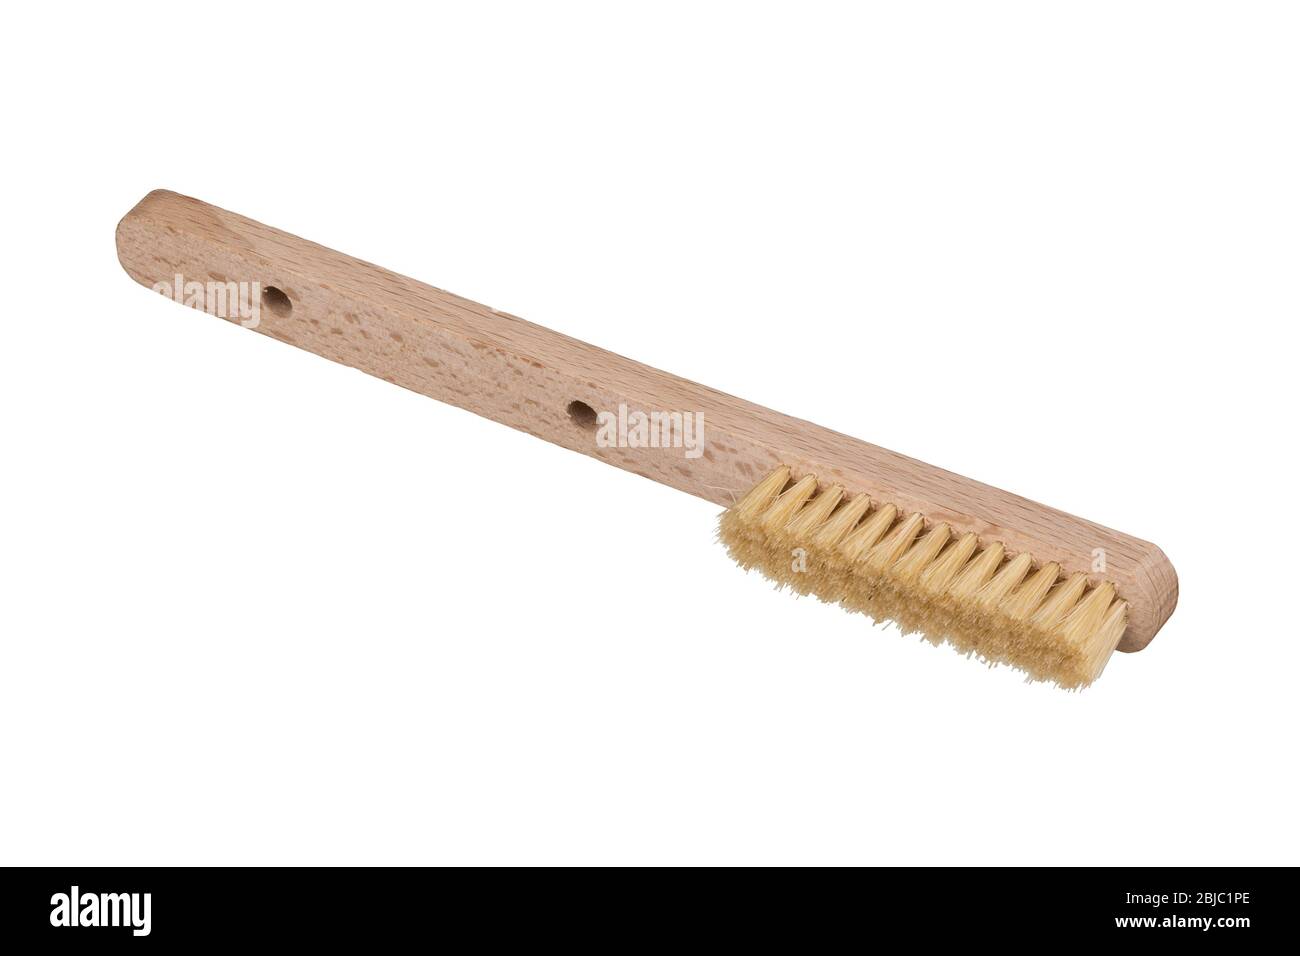 Rock climbing bouldering boulder cleaning brush. Wooden brush isolated on white background Stock Photo